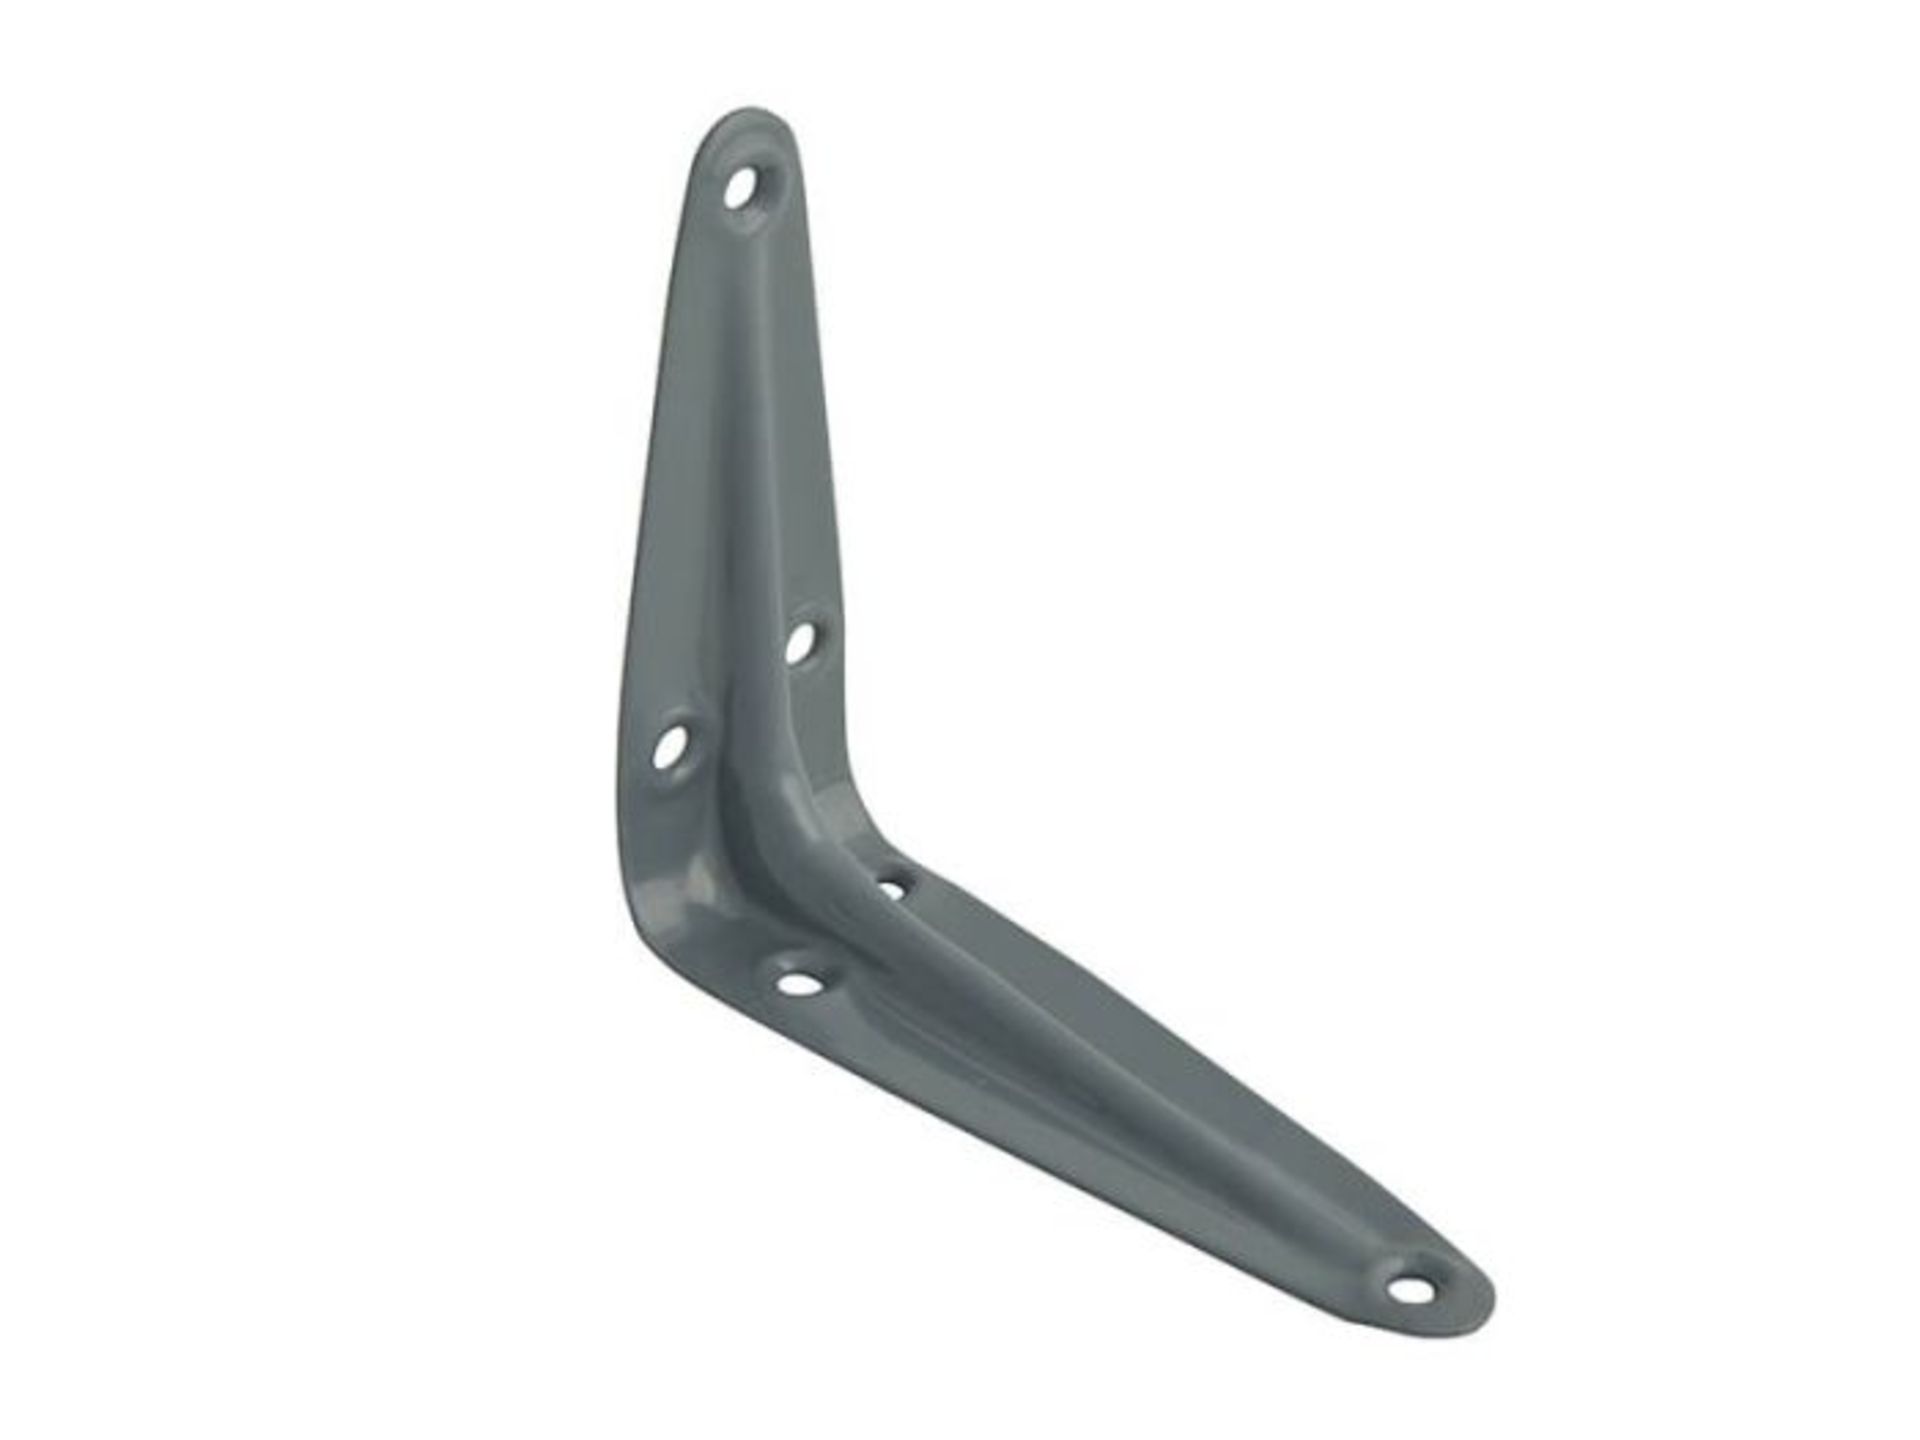 Pack of 100 Forge London Pattern Shelf Brackets Grey 3"" x 4"" RRP £36 - Image 2 of 2